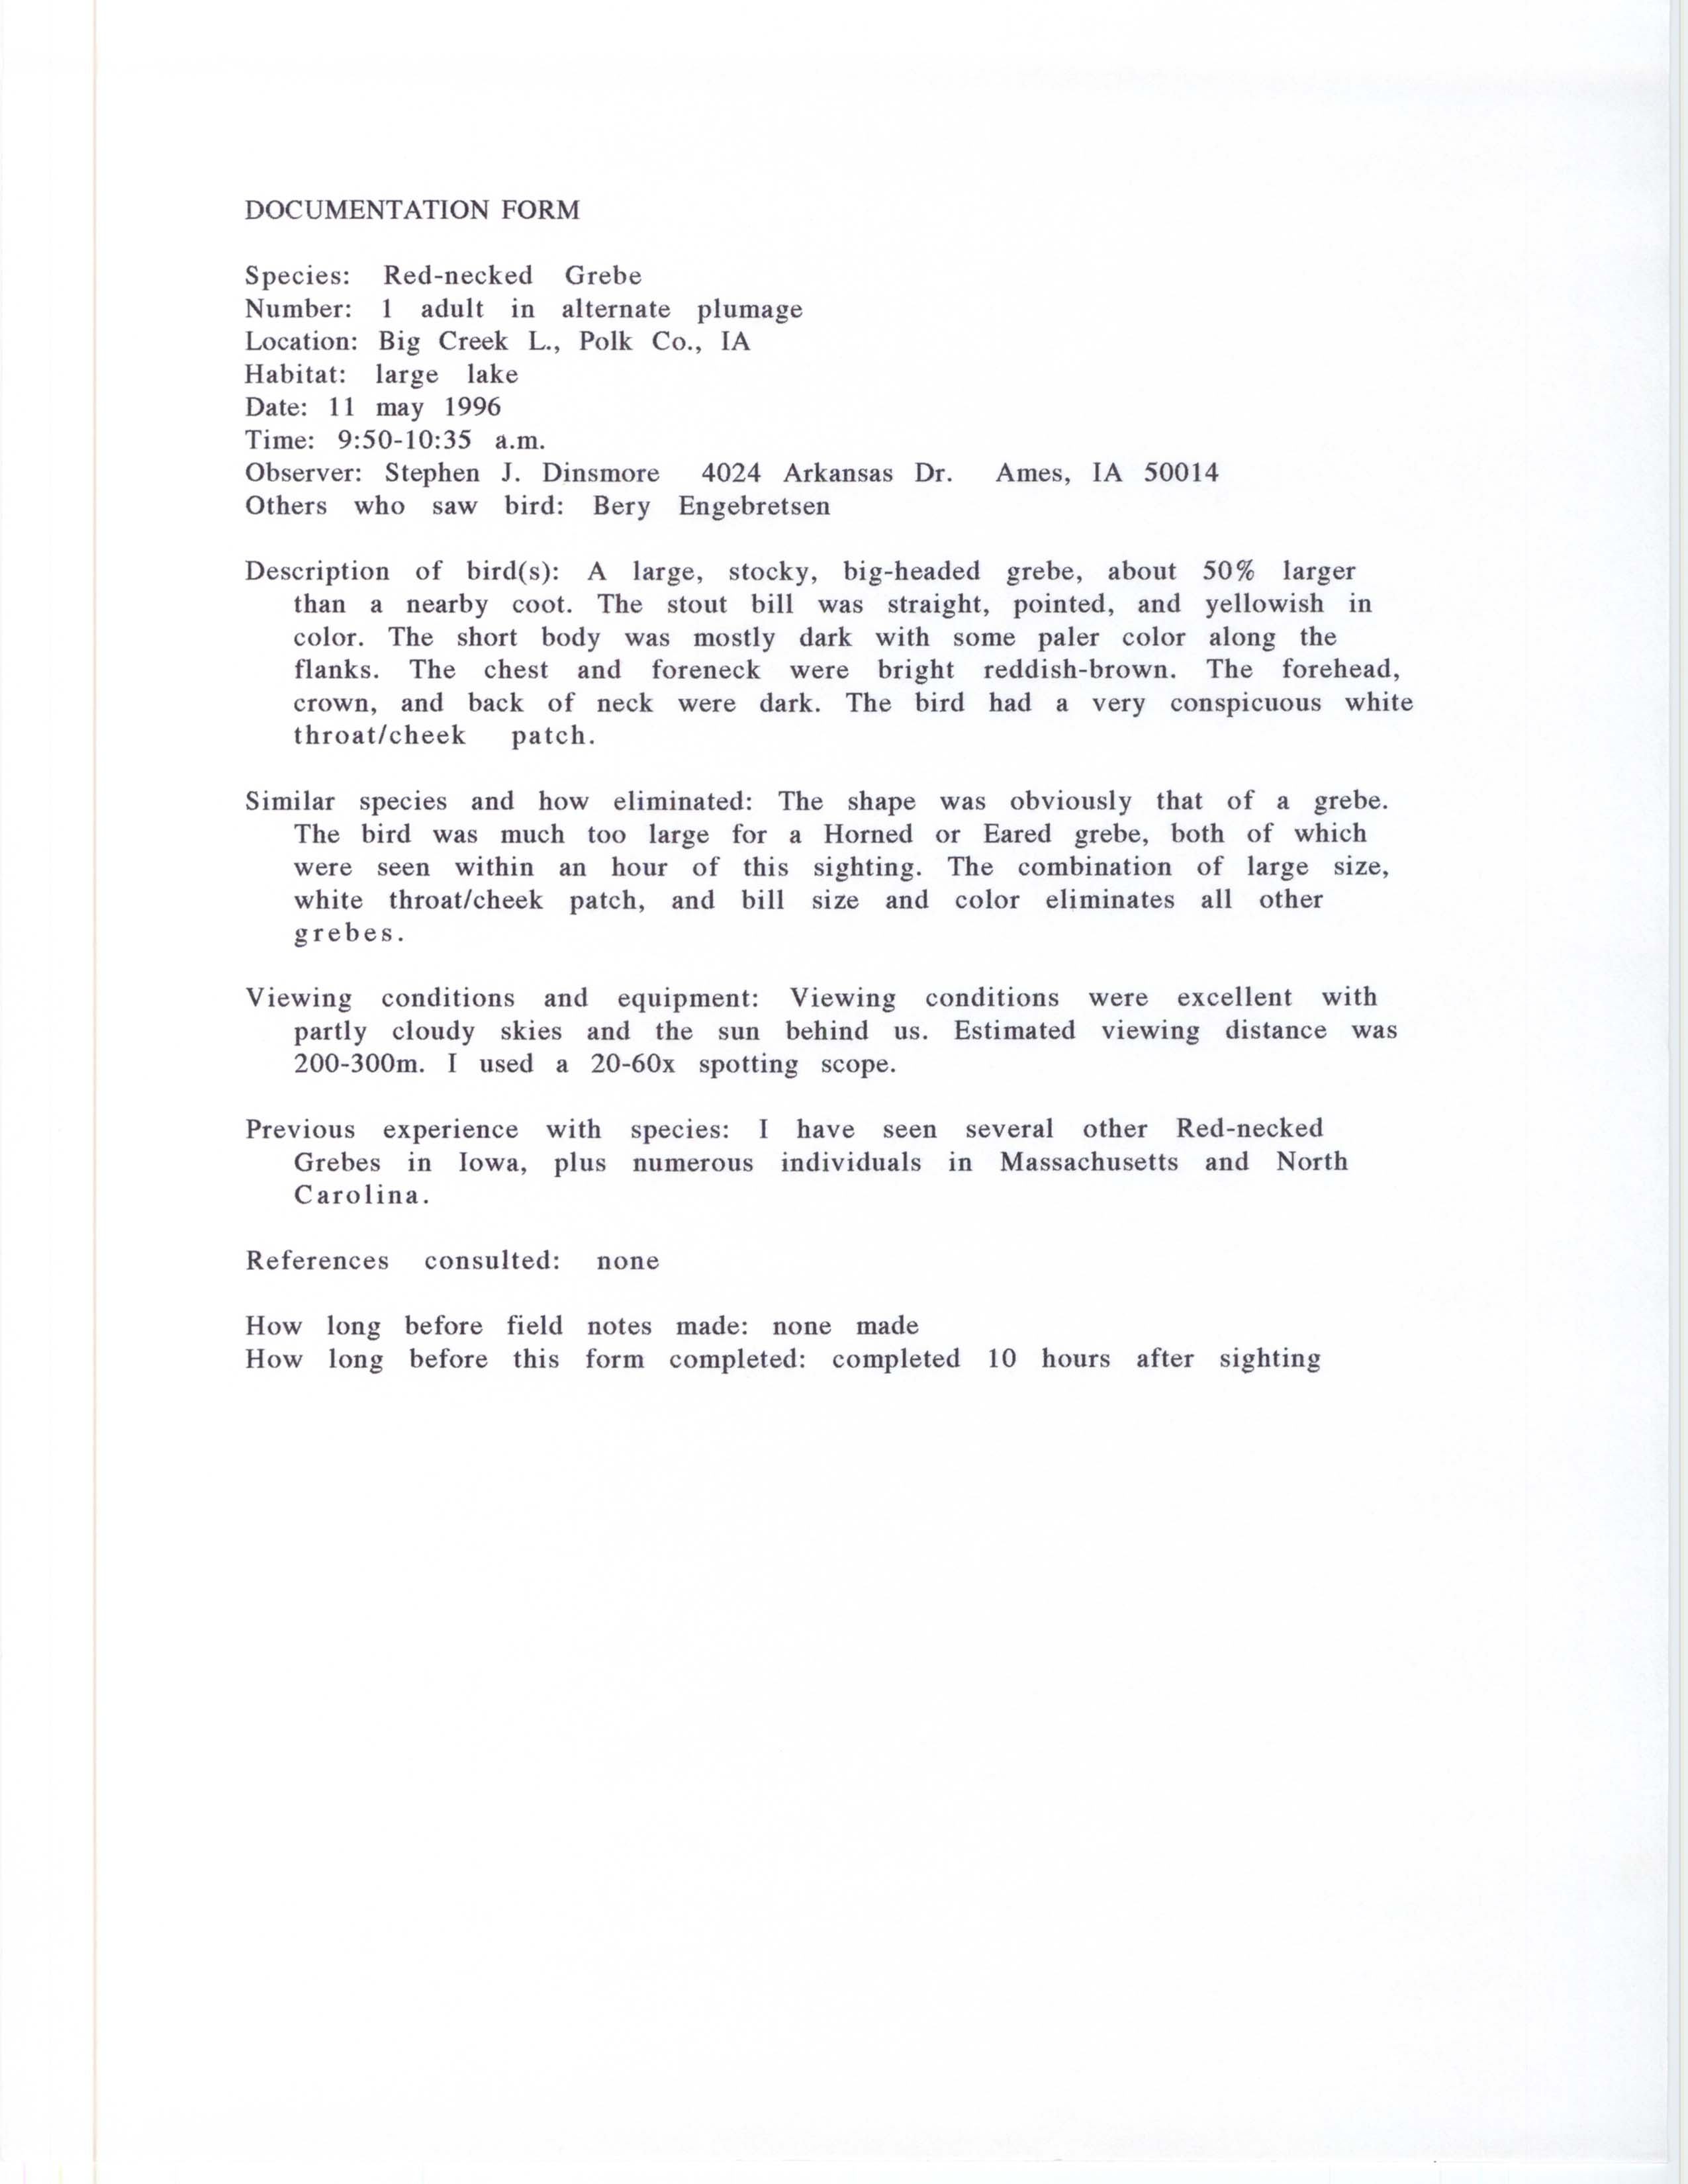 Rare bird documentation form for Red-necked Grebe at Big Creek Lake, 1996